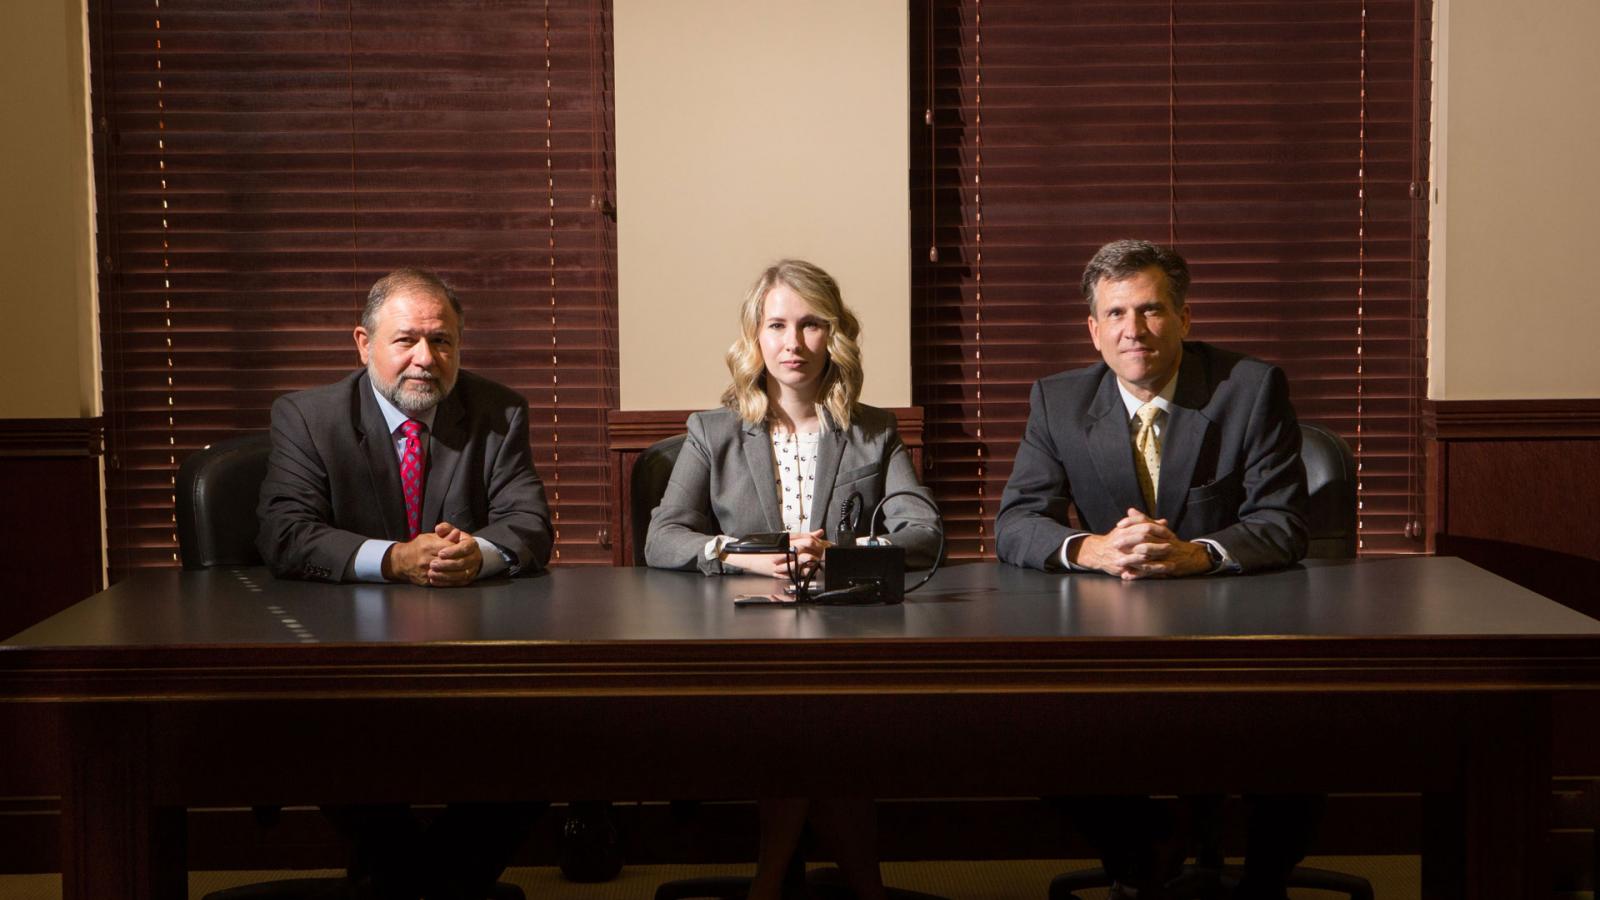 Campbell & Rogers Lawyers: Michael Campbell, Erica Stacy-Stegman, and Earl Rogers III